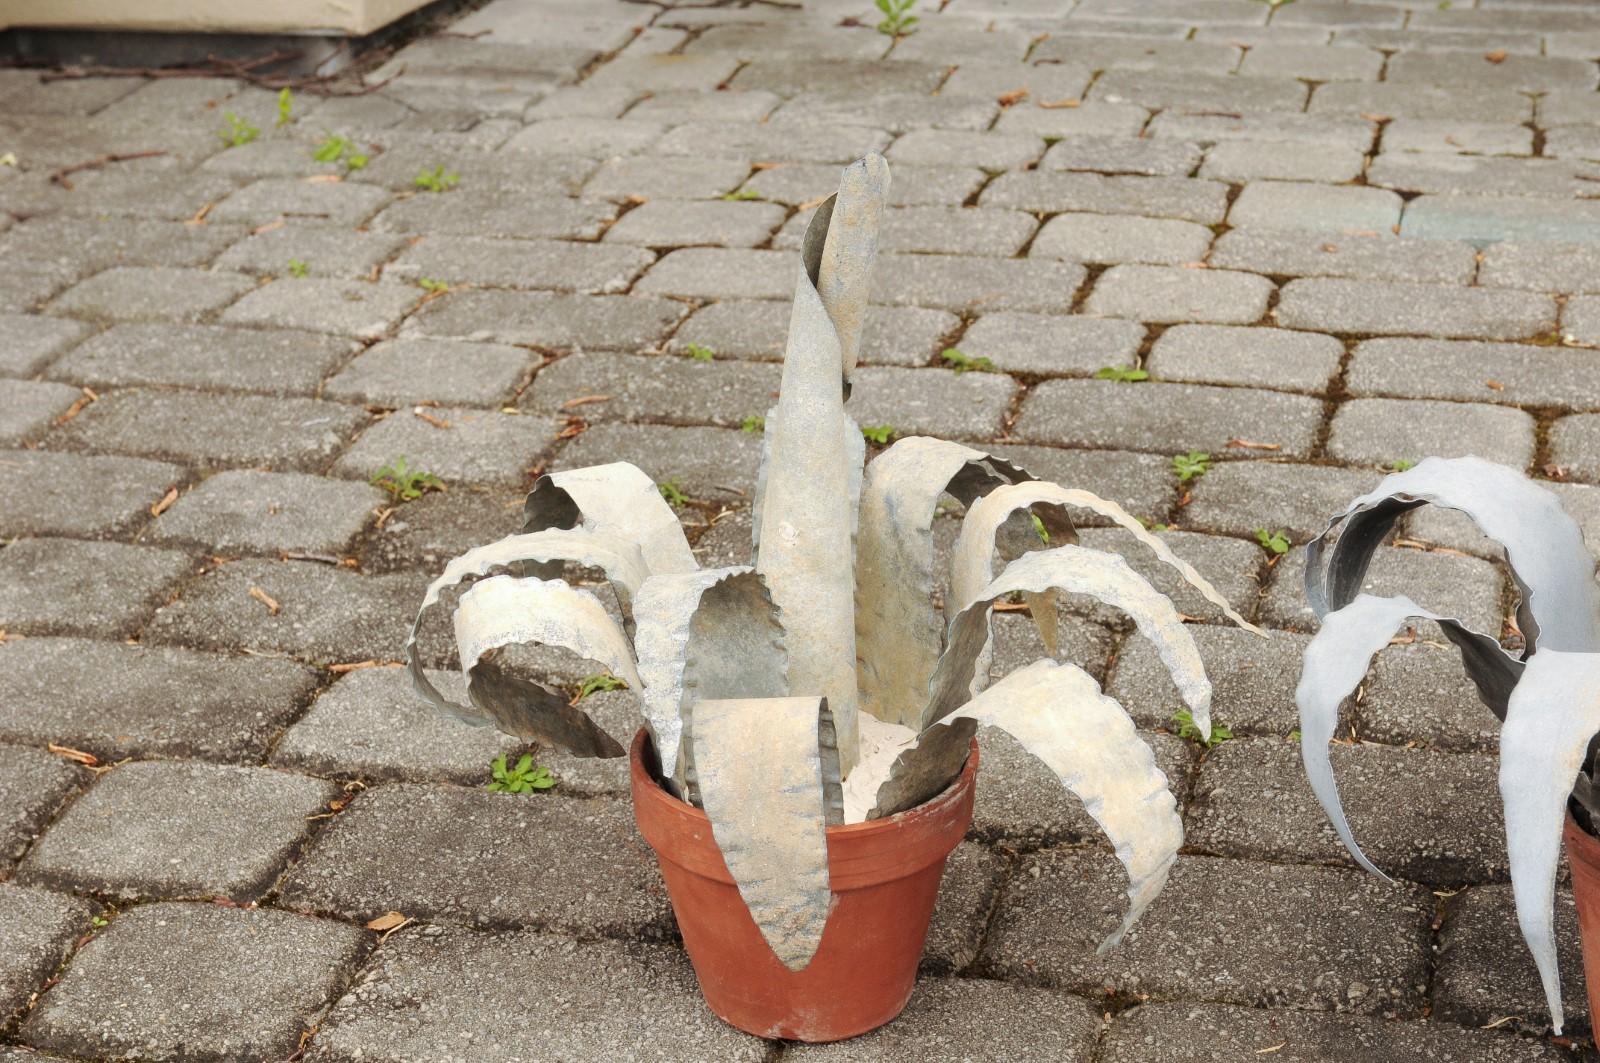 Two French Vintage Midcentury Zinc Agave Plant Sculptures in Terracotta Pots 1